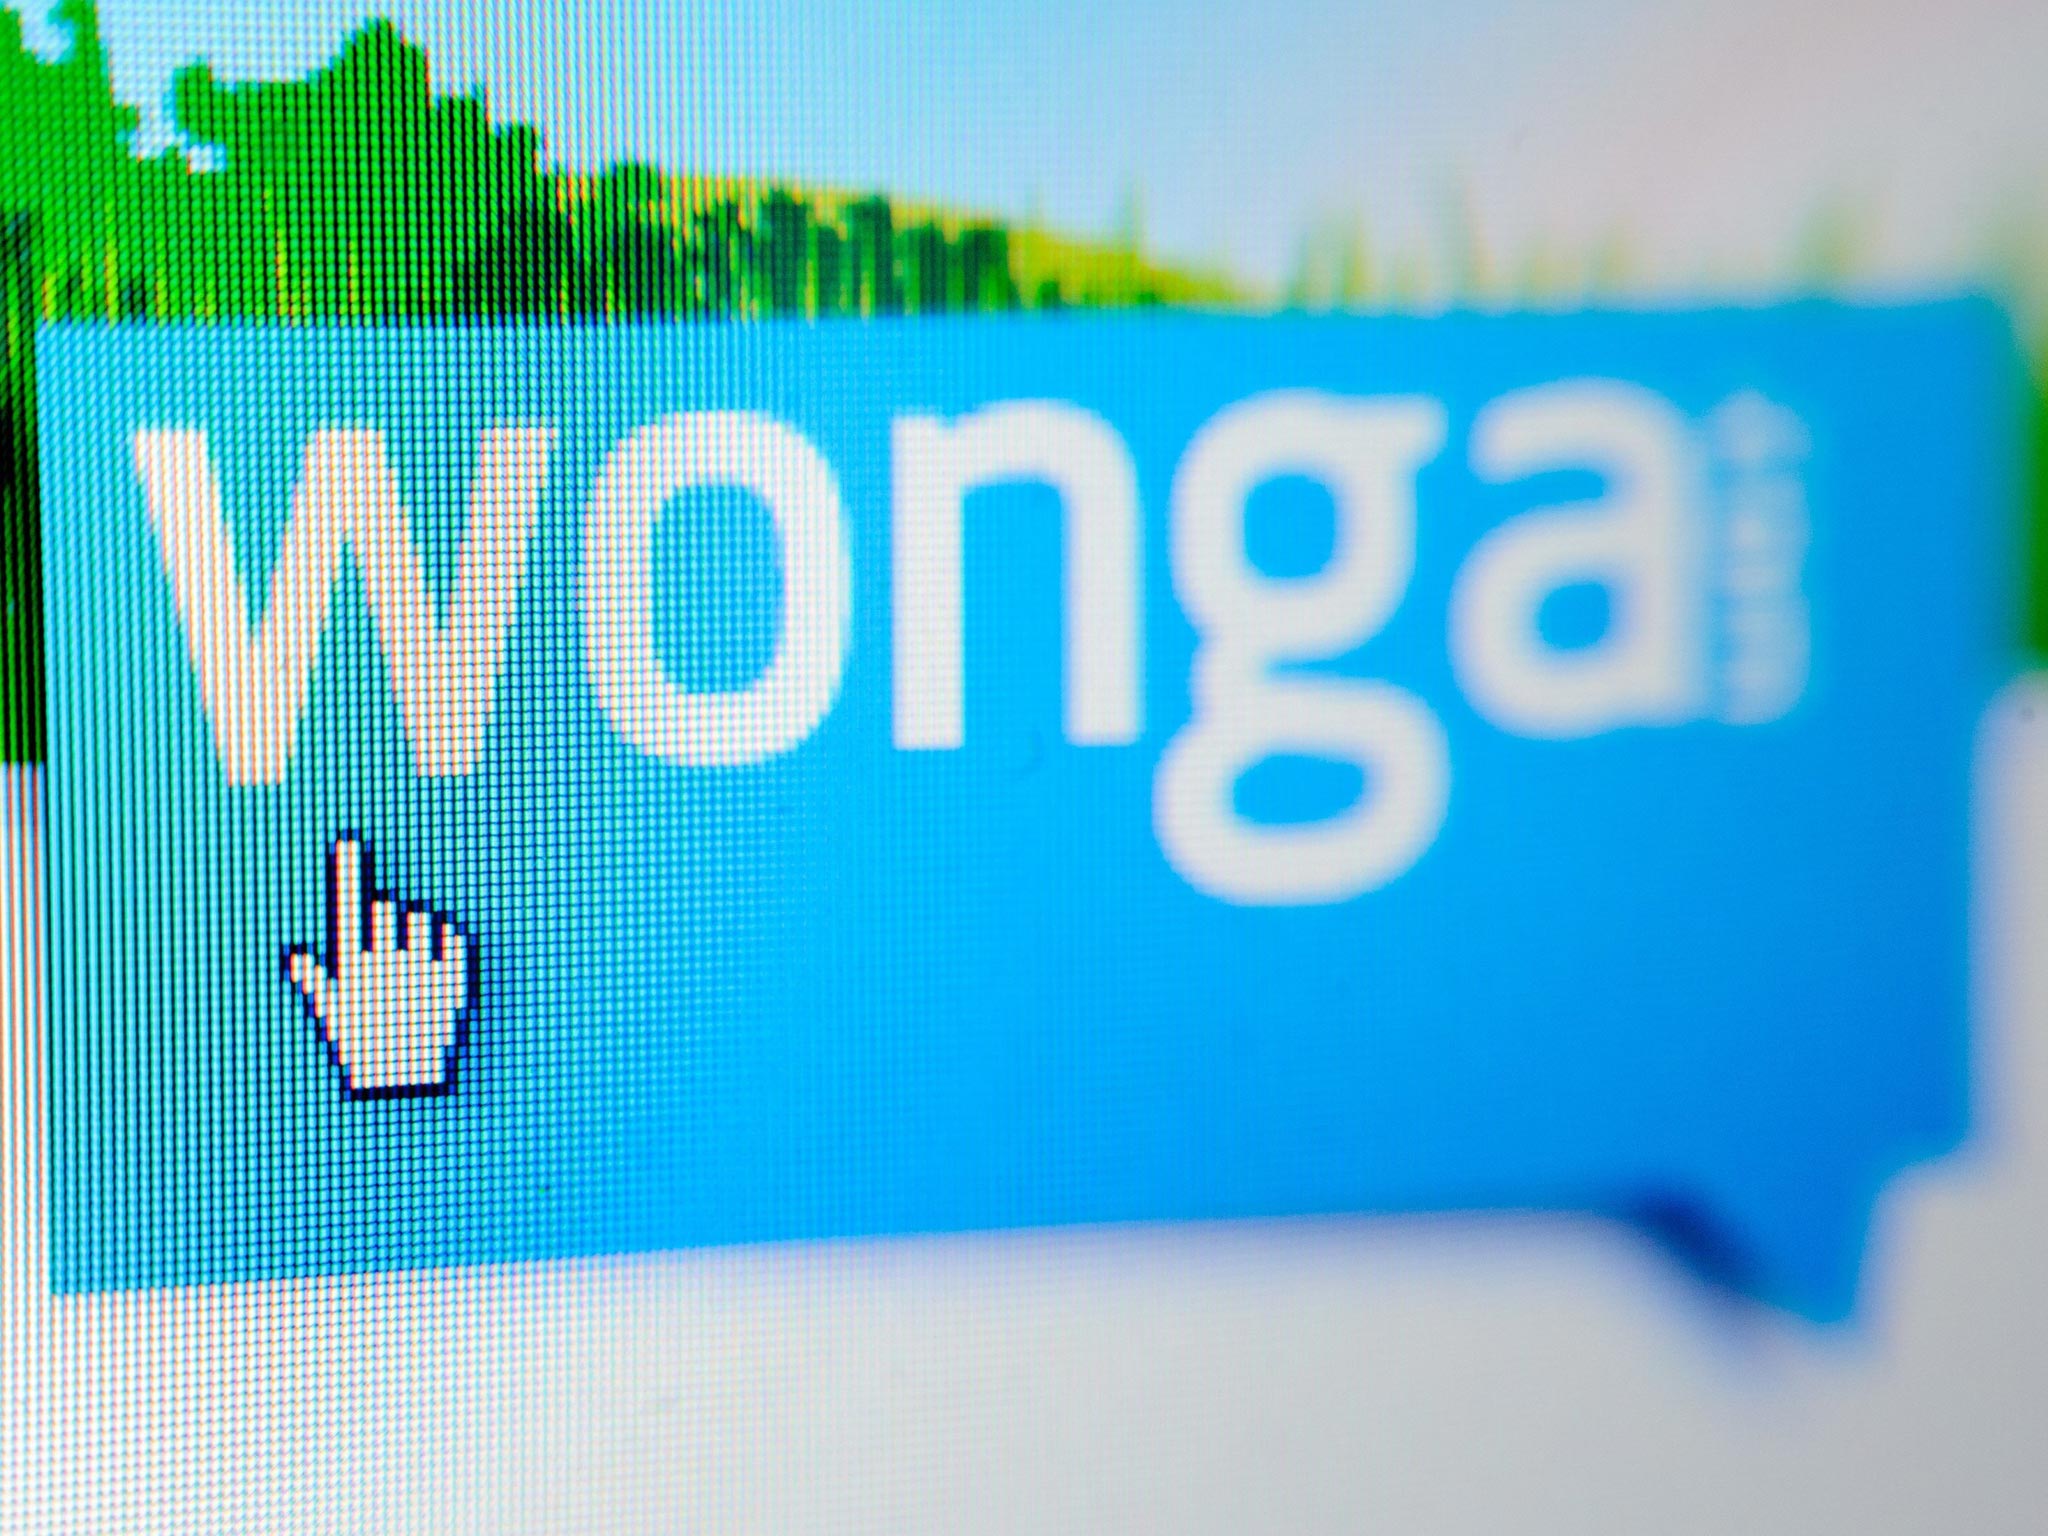 Wonga has been bringing in new management following its vilification for sending threatening letters to customers from non-existent companies appearing to be law firms